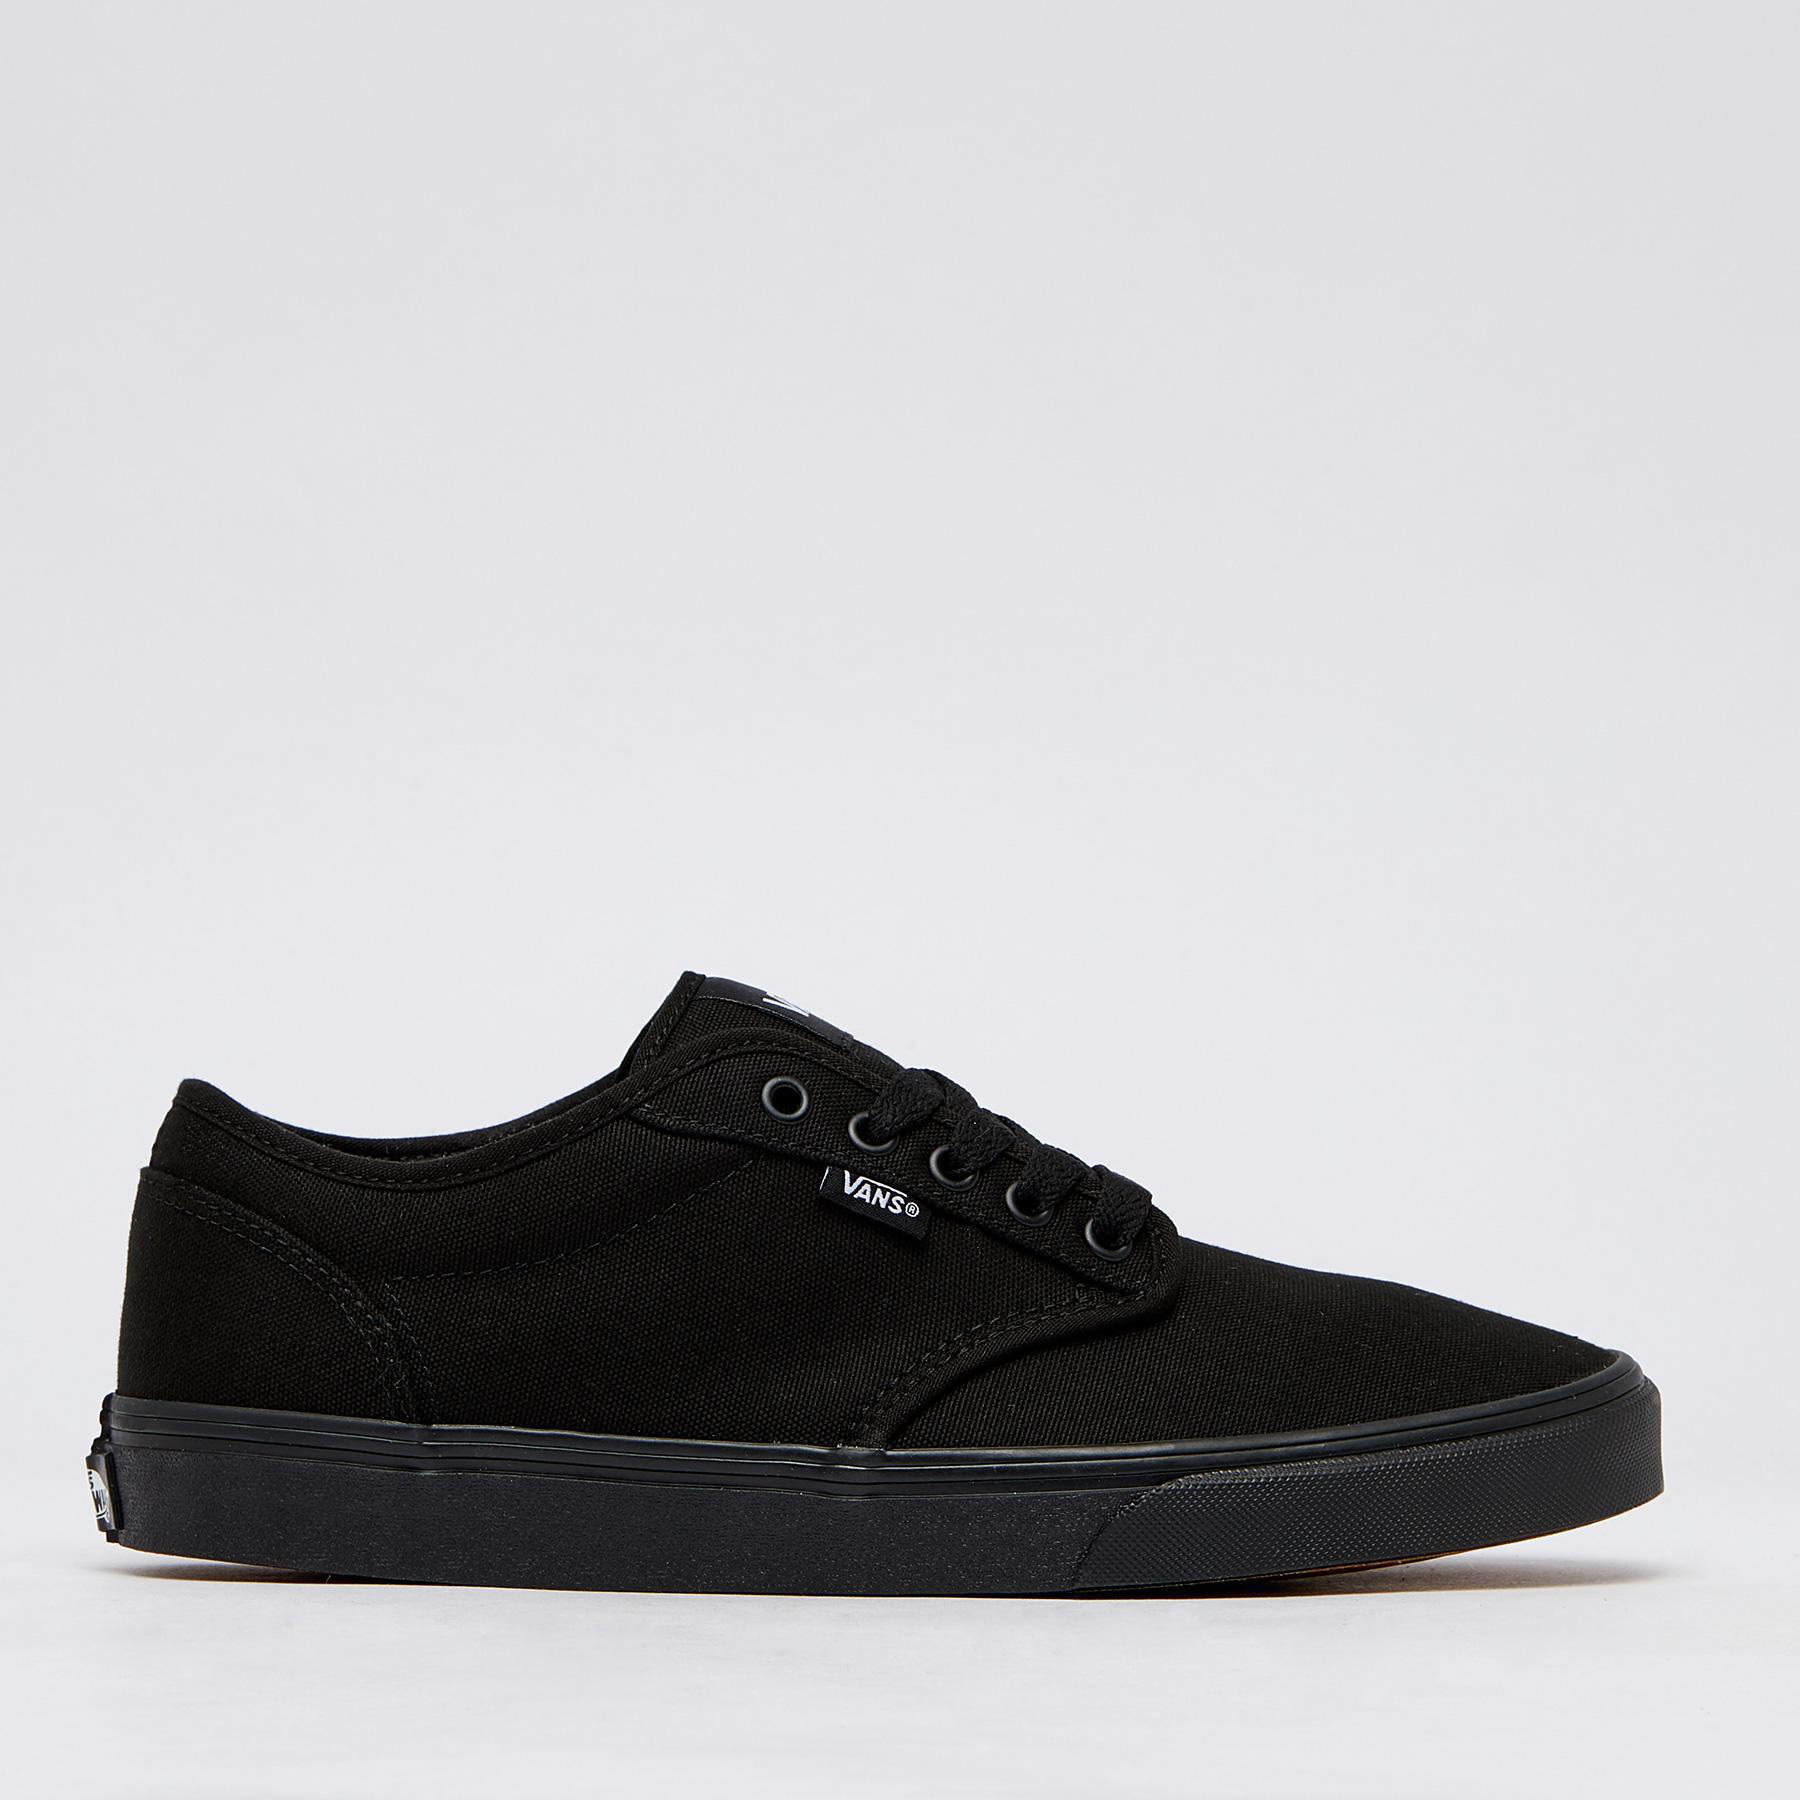 Vans Atwood Shoes In Black/black - Fast Shipping & Easy Returns - City ...